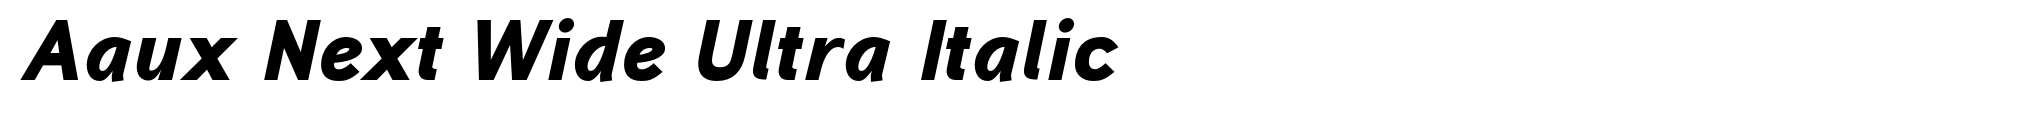 Aaux Next Wide Ultra Italic image